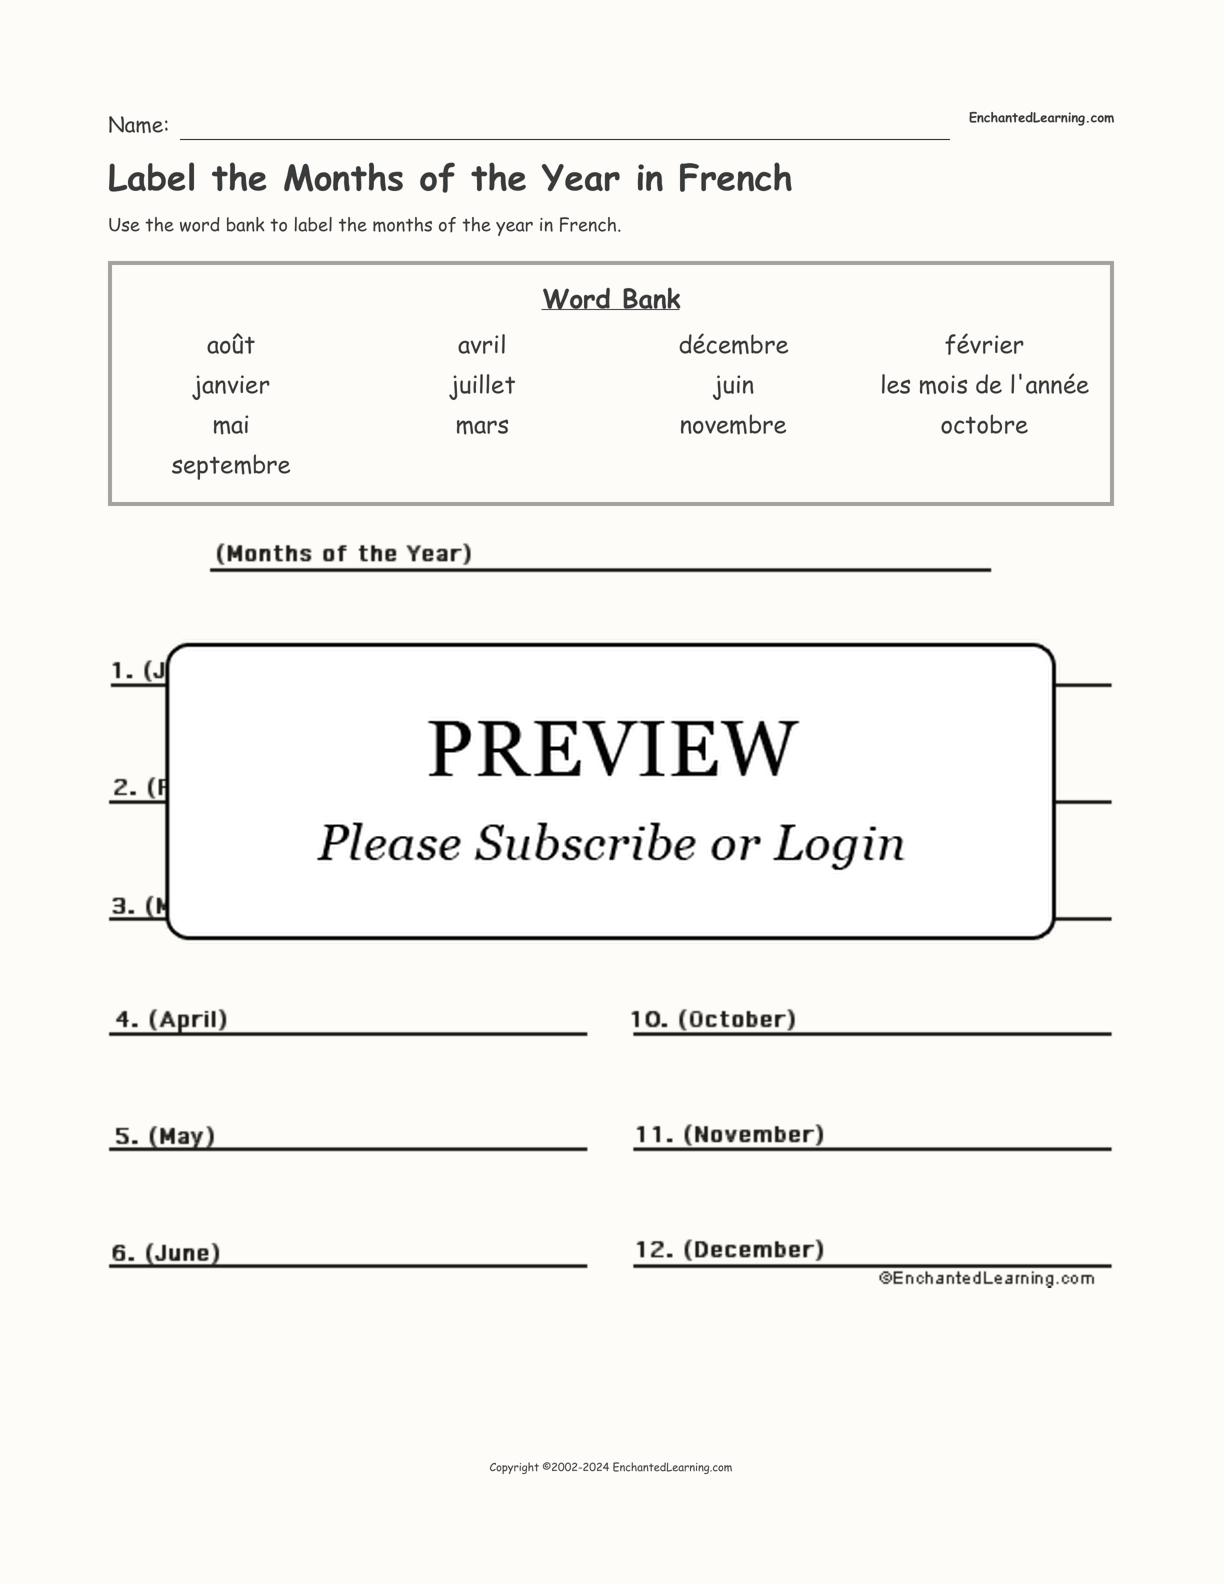 Label the Months of the Year in French interactive worksheet page 1